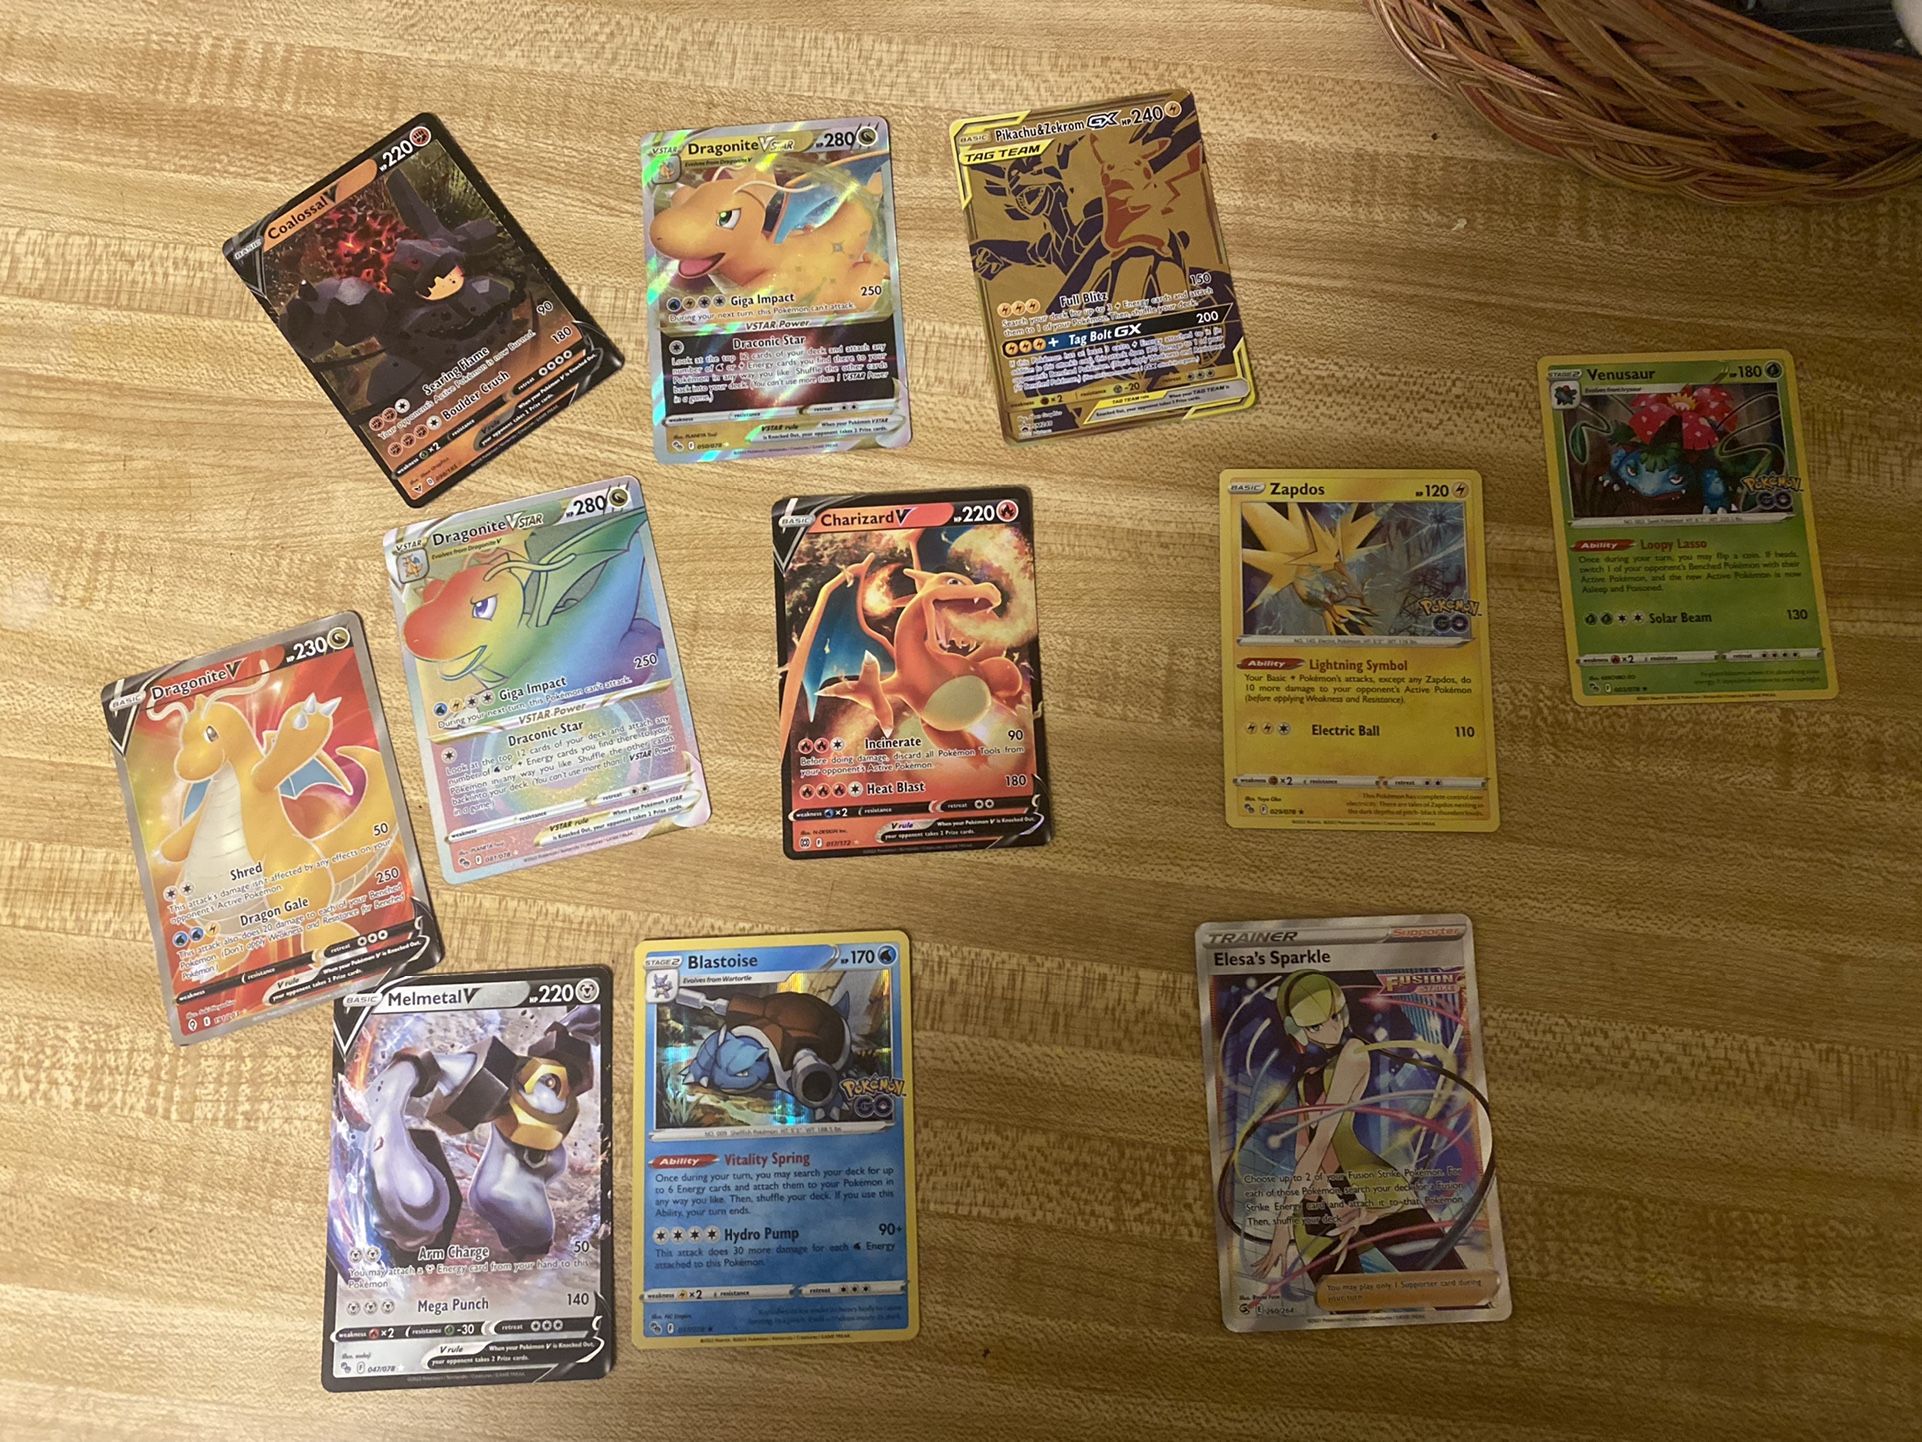 Jumbo Rayquaza GX 177a/168 Pokémon Card for Sale in Miami, FL - OfferUp